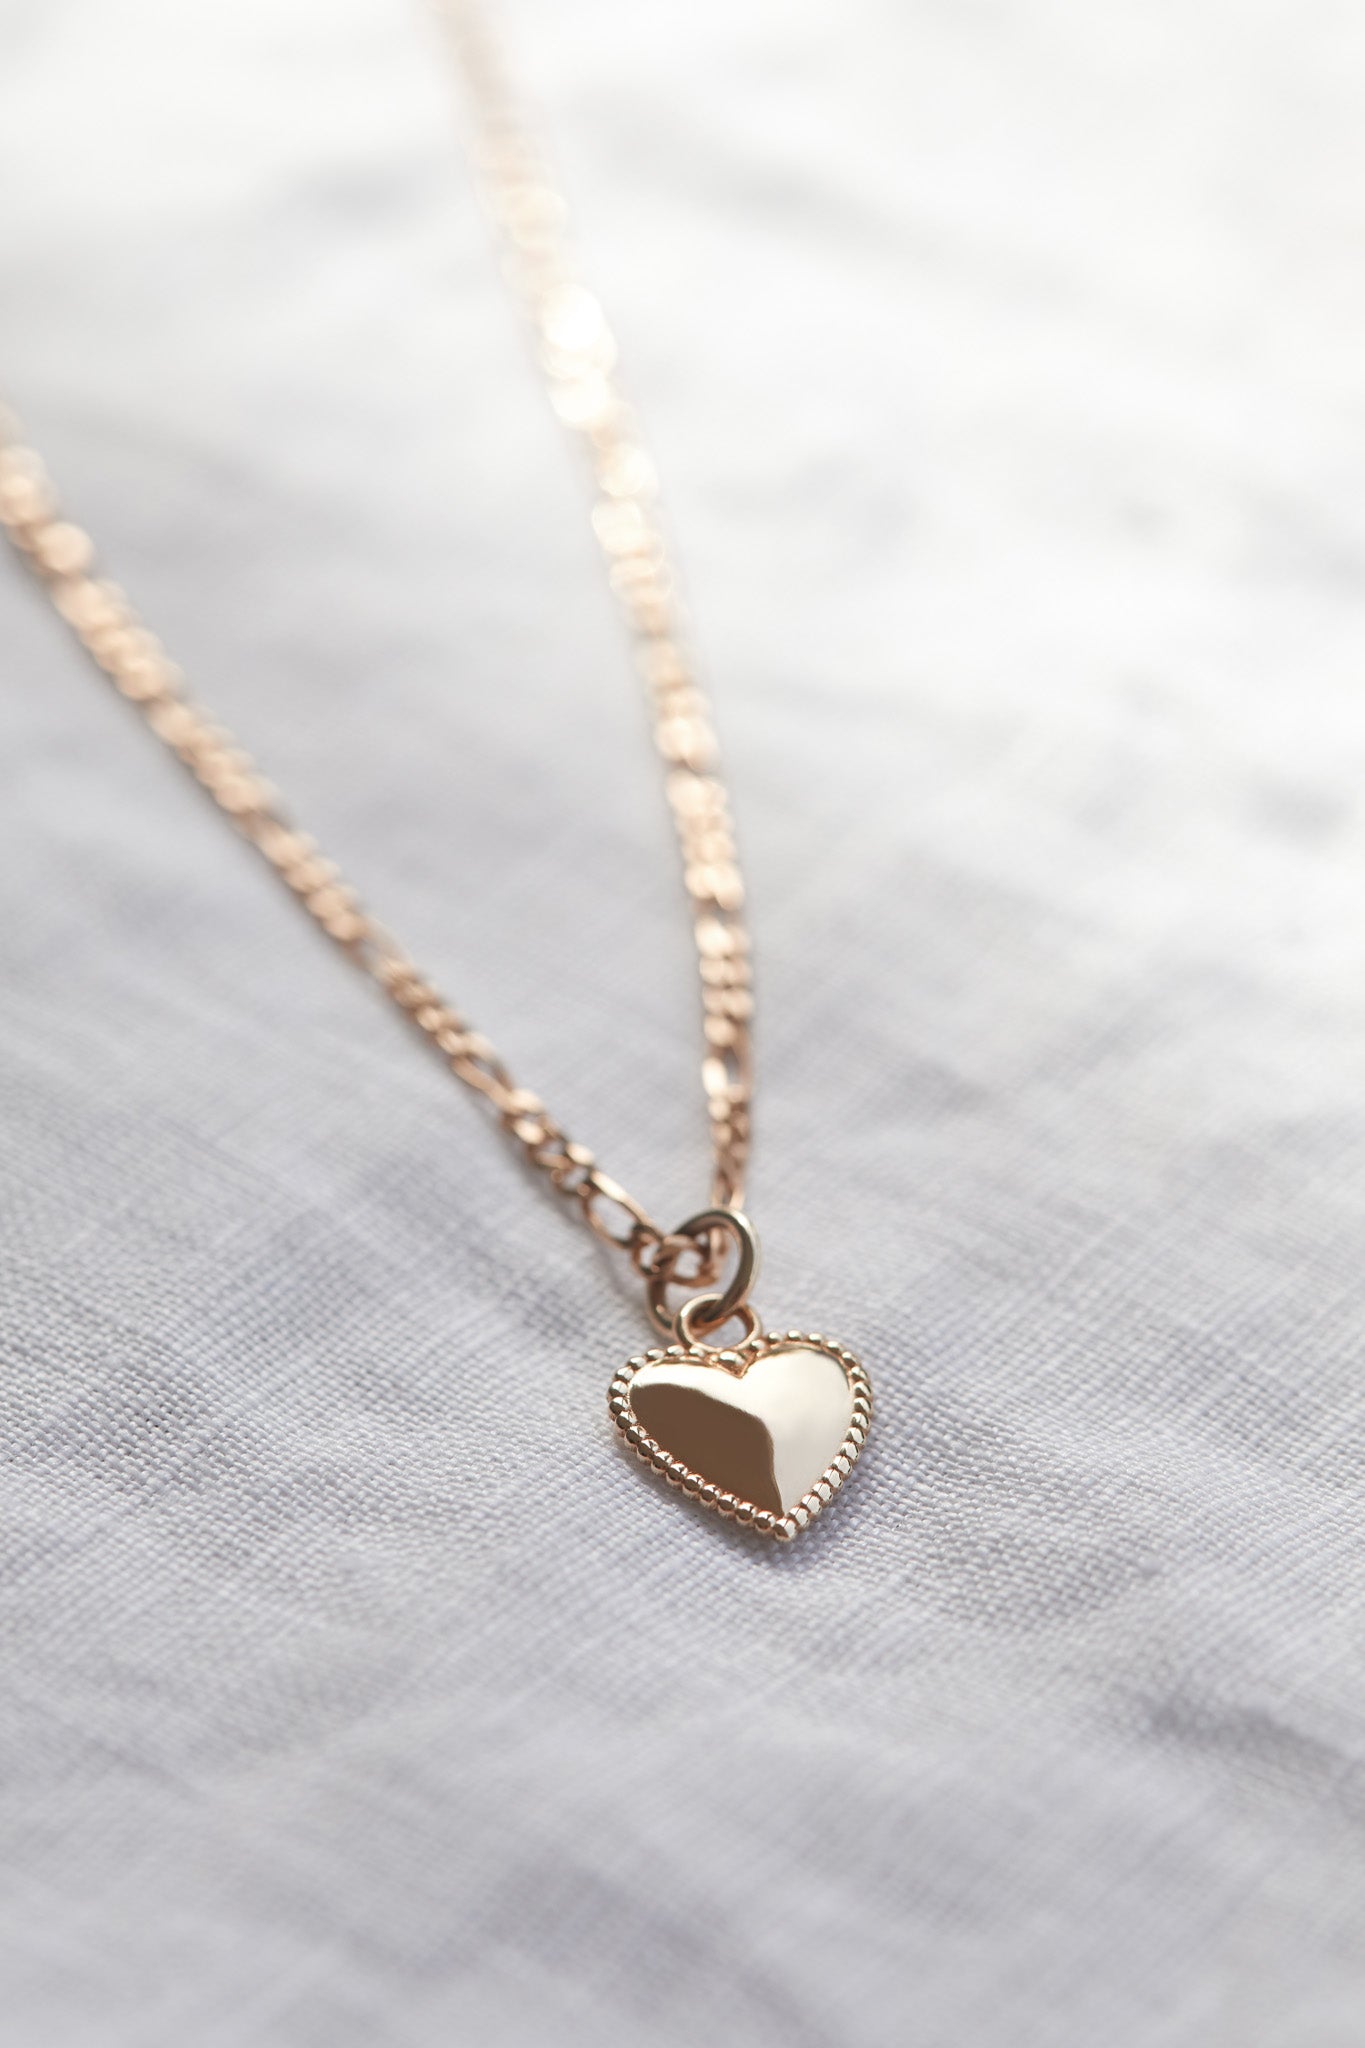 Elle Puffed Heart Pendant in 9ct Rose Gold